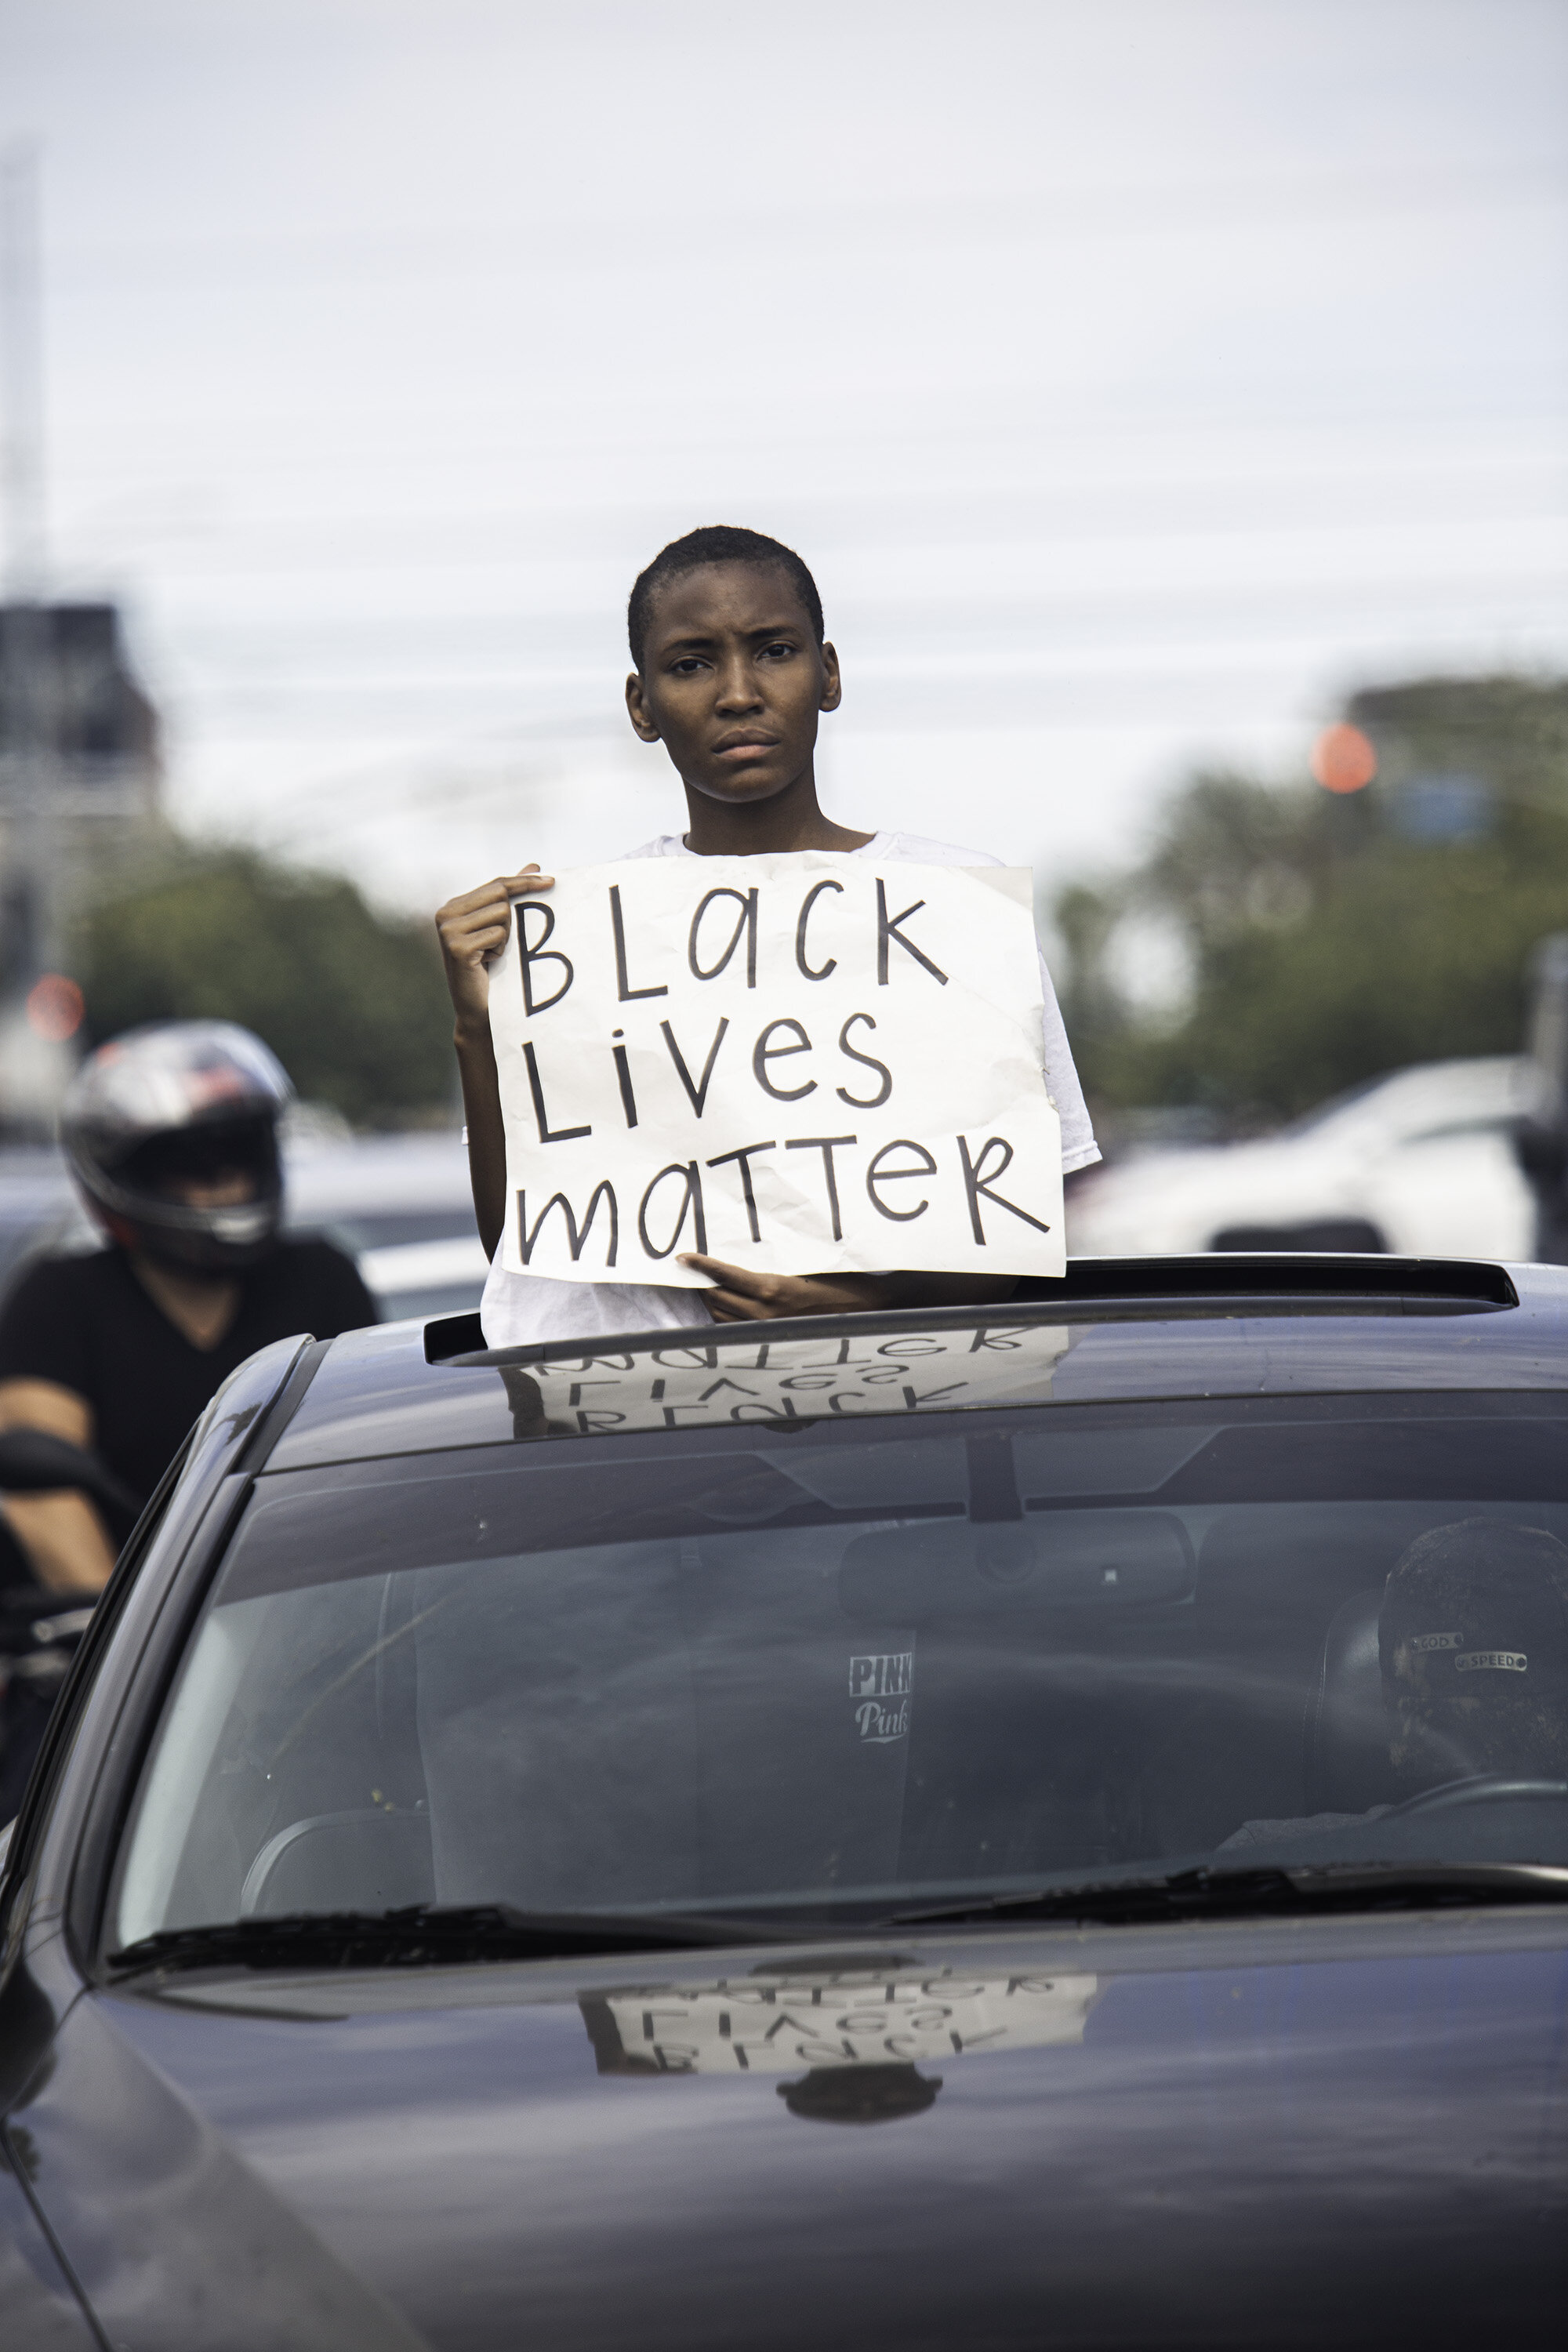  A young protester holds a Black Lives Matter sign on Saturday, May 30, 2020, in Los Angeles, California. The killing by police of George Floyd in Minneapolis, MN on May 25, triggered nationwide protests.  